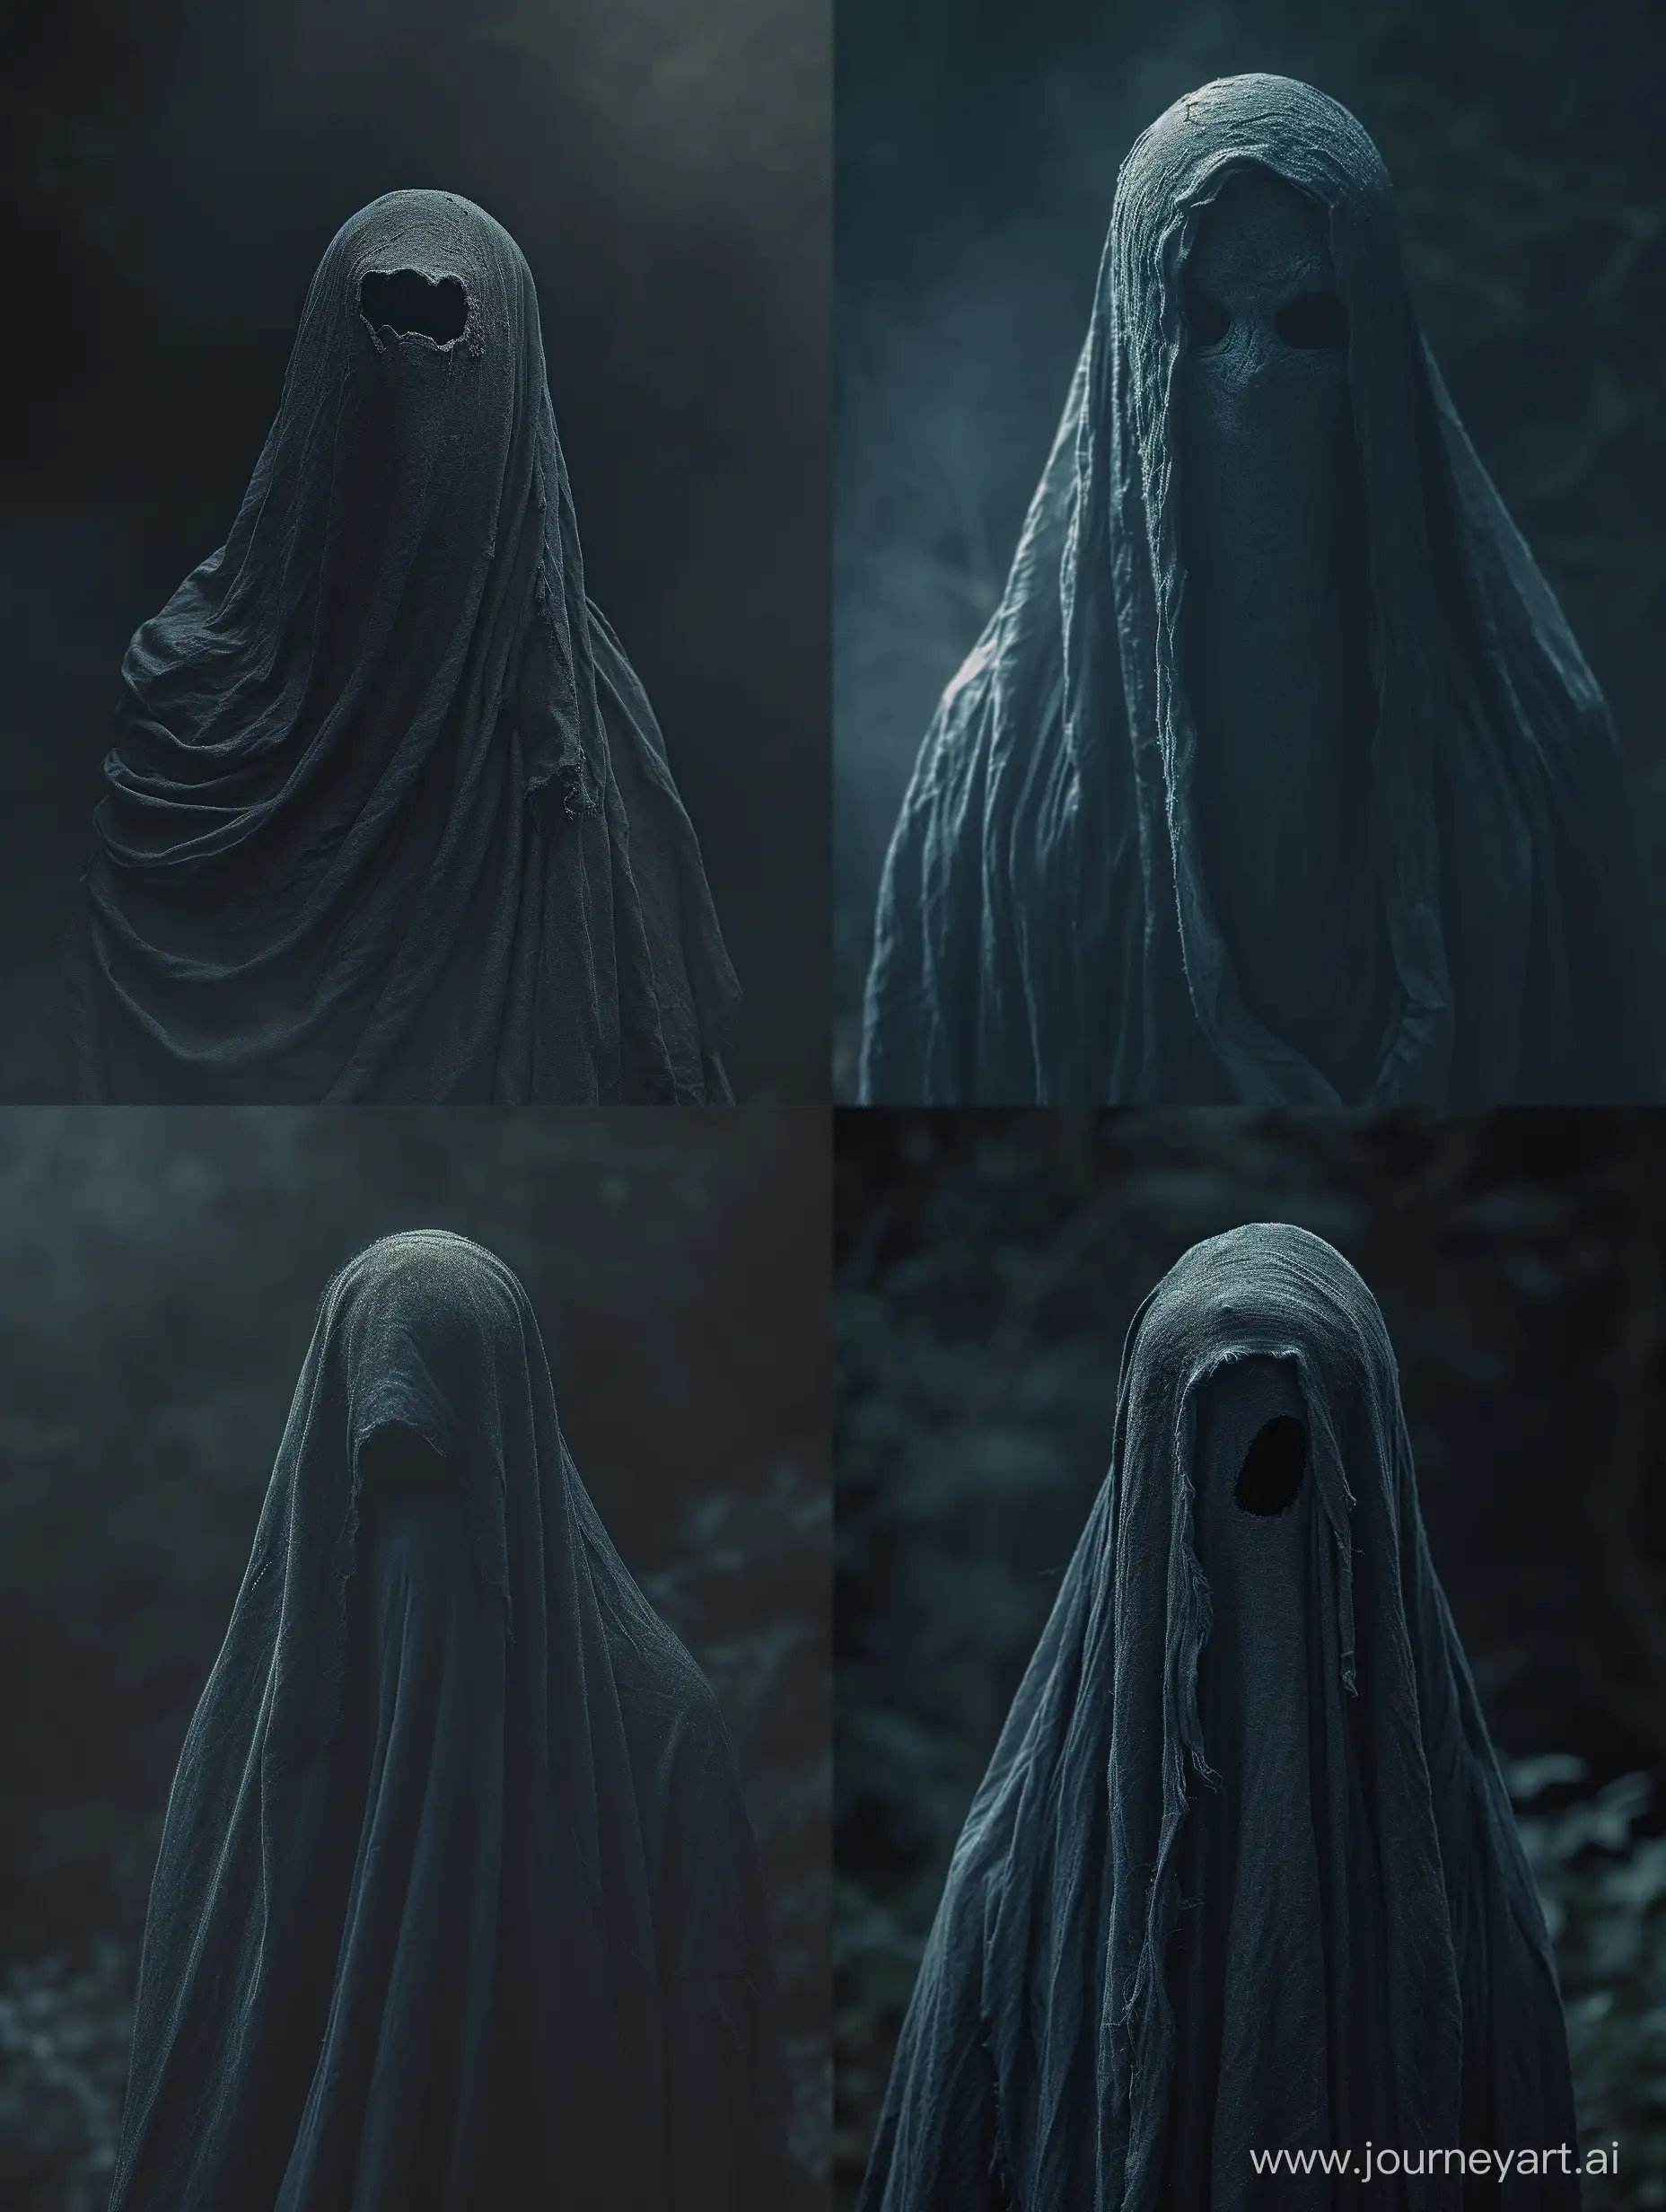 Ethereal-Ghost-CloseUp-Haunting-4K-Photograph-with-Dark-Cloak